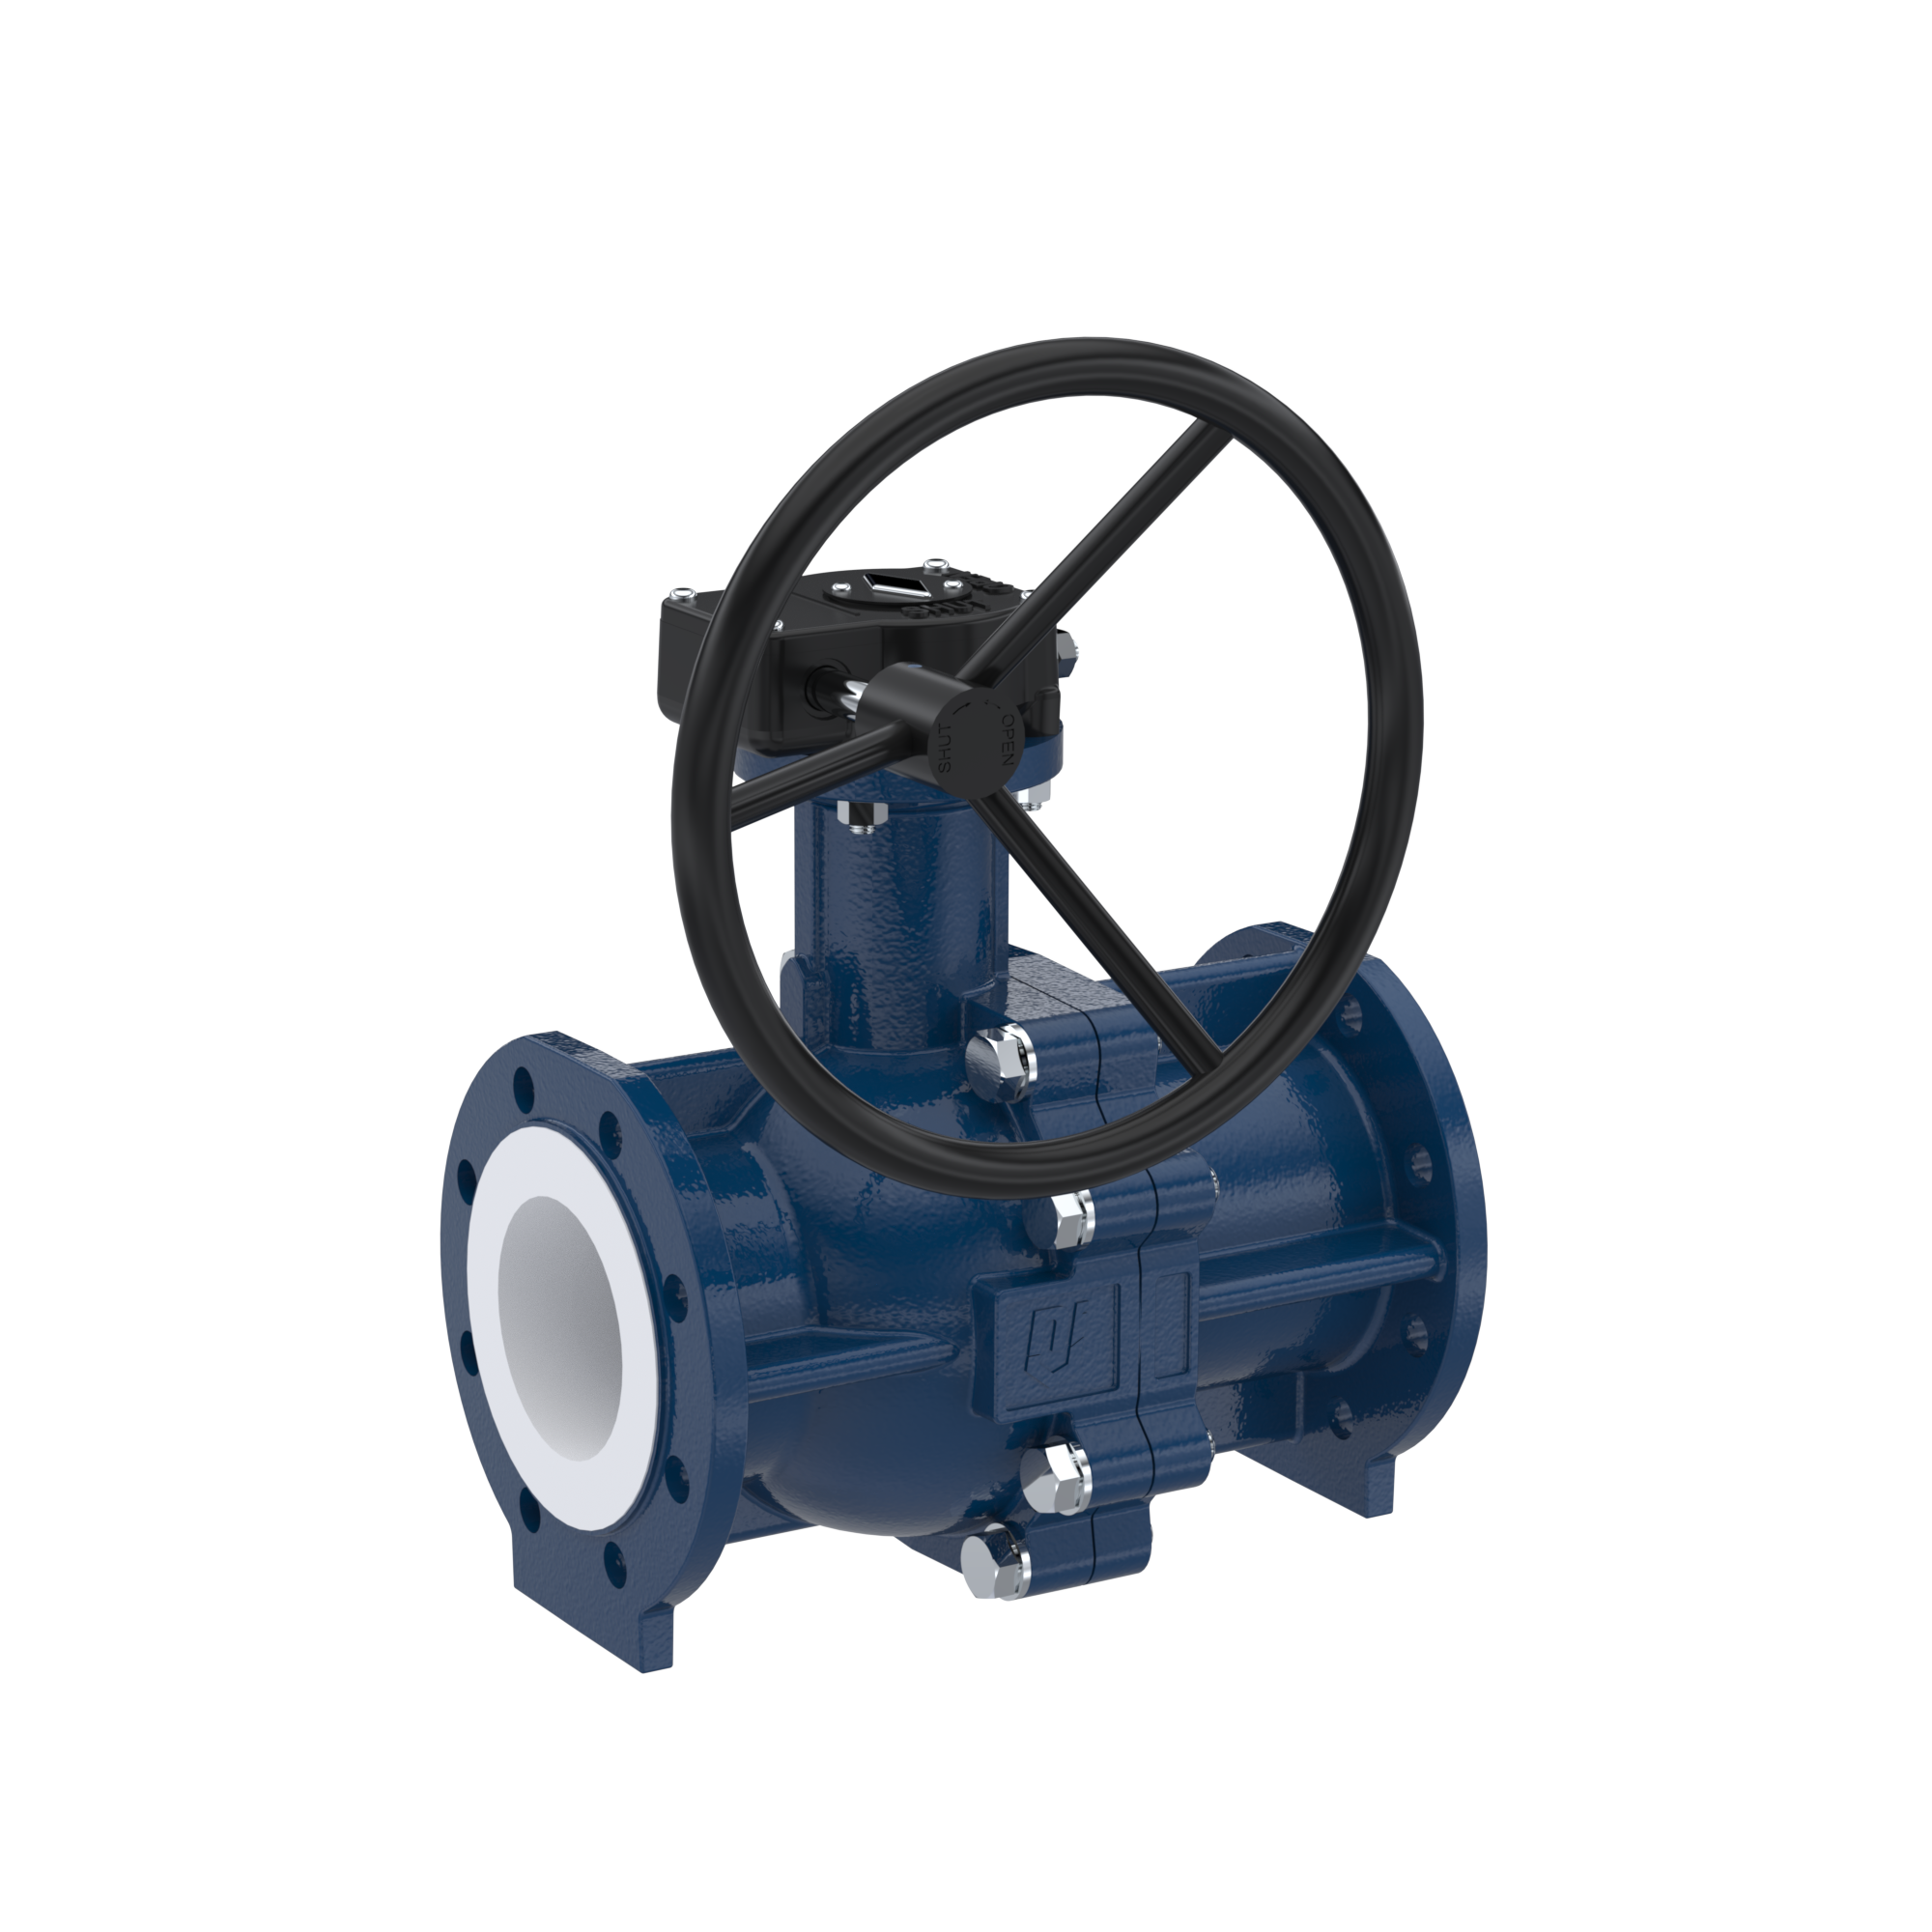 PFA-flange ball valve FK13 DN150 - 6" inch PN10/16 made of spheroidal graphite cast iron with worm gear